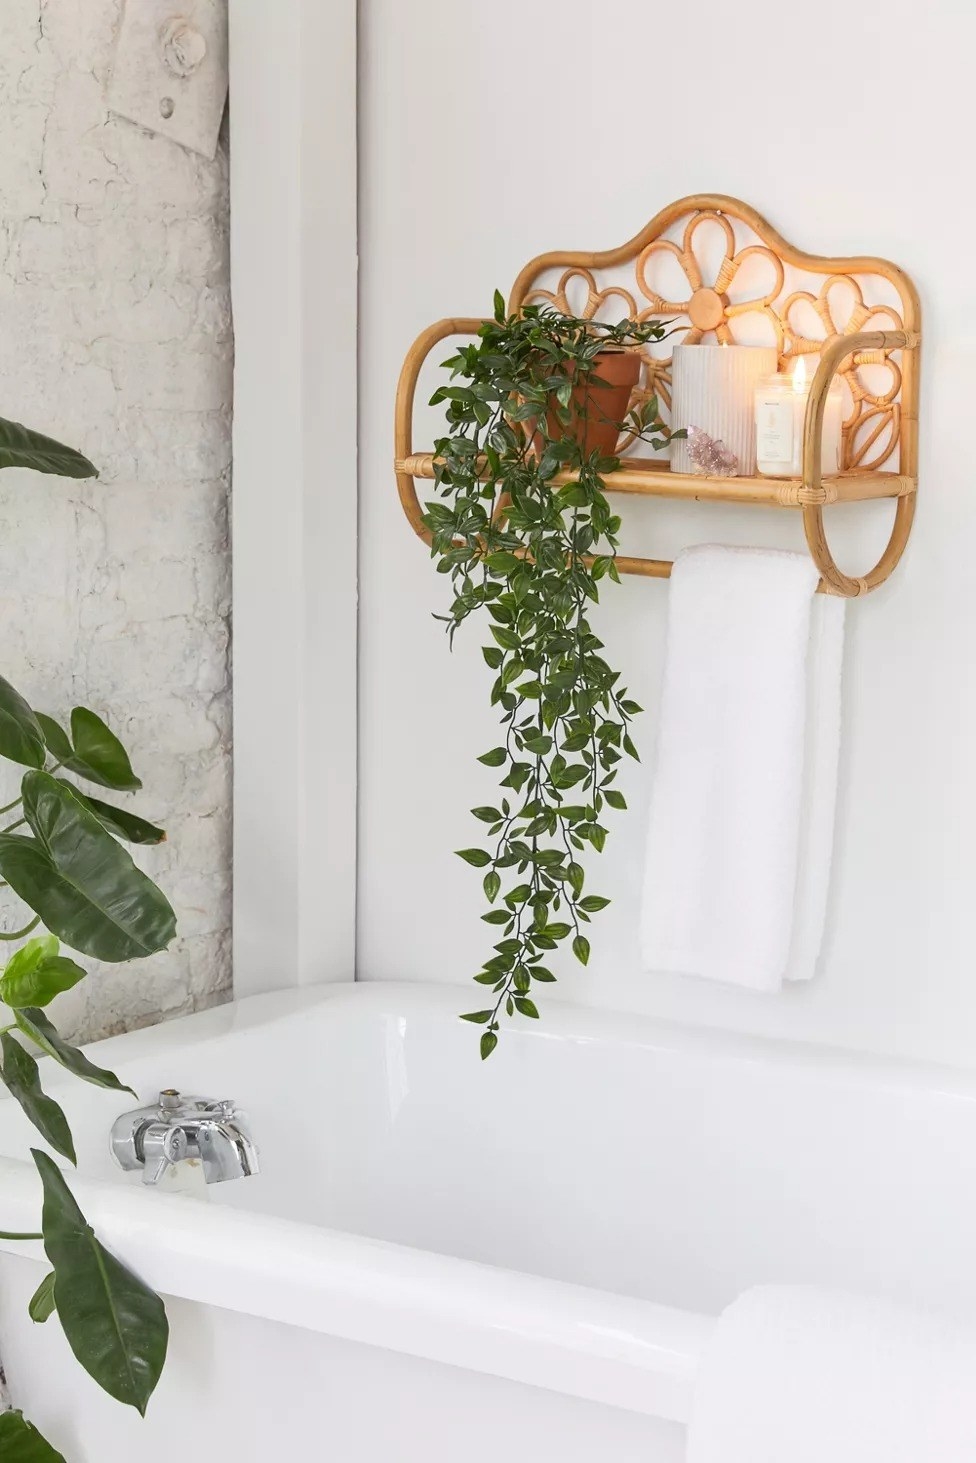 the wall shelf above a bathtub with candles and a towel on it